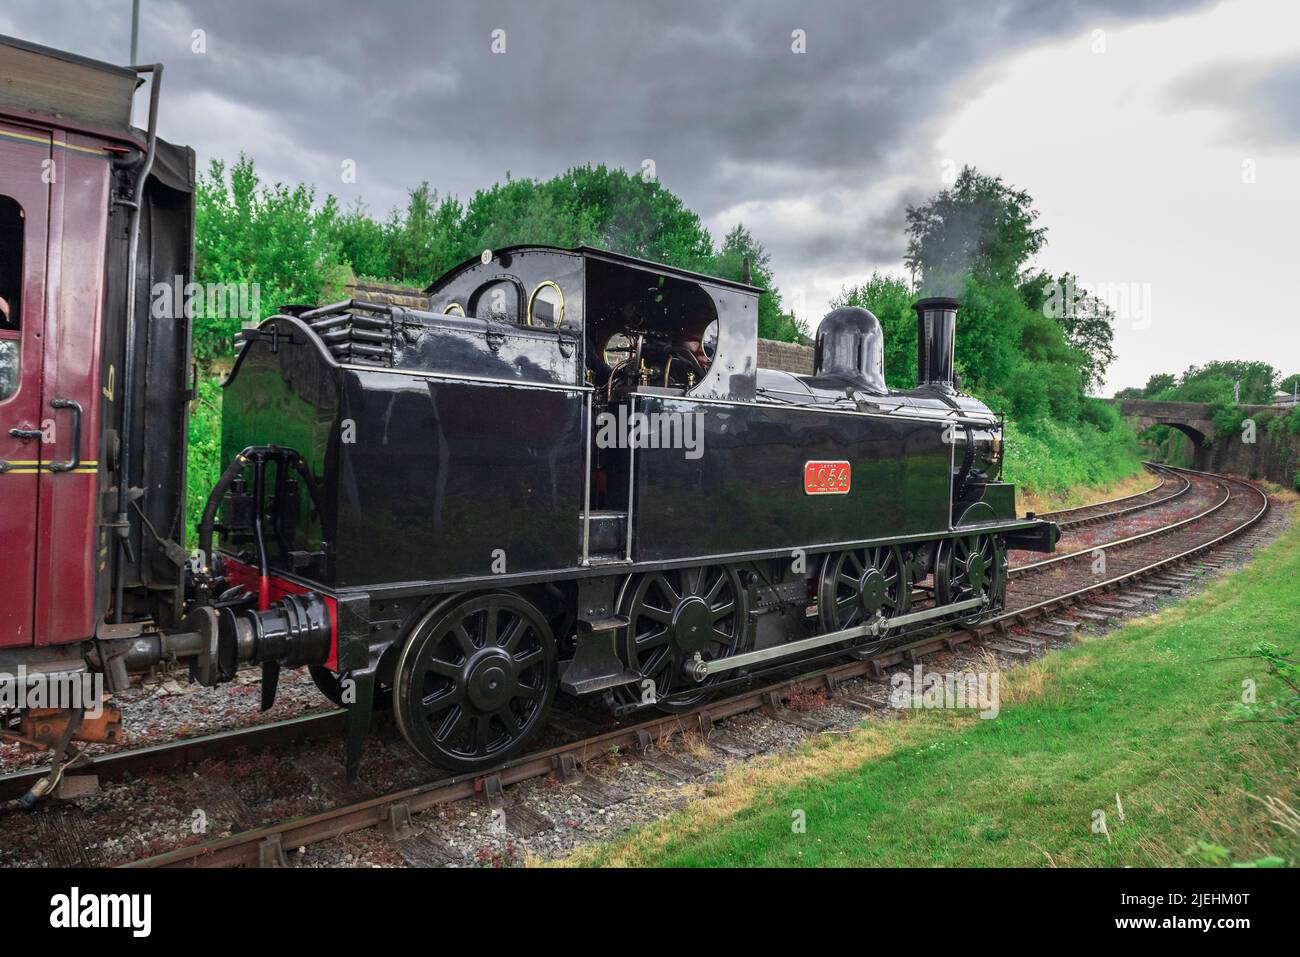 The LNWR Coal Tank engine number 1054 built in 1888 is in the care of the Bahamas Locomotive Society. It is seen at the Heywood station on the East La Stock Photo